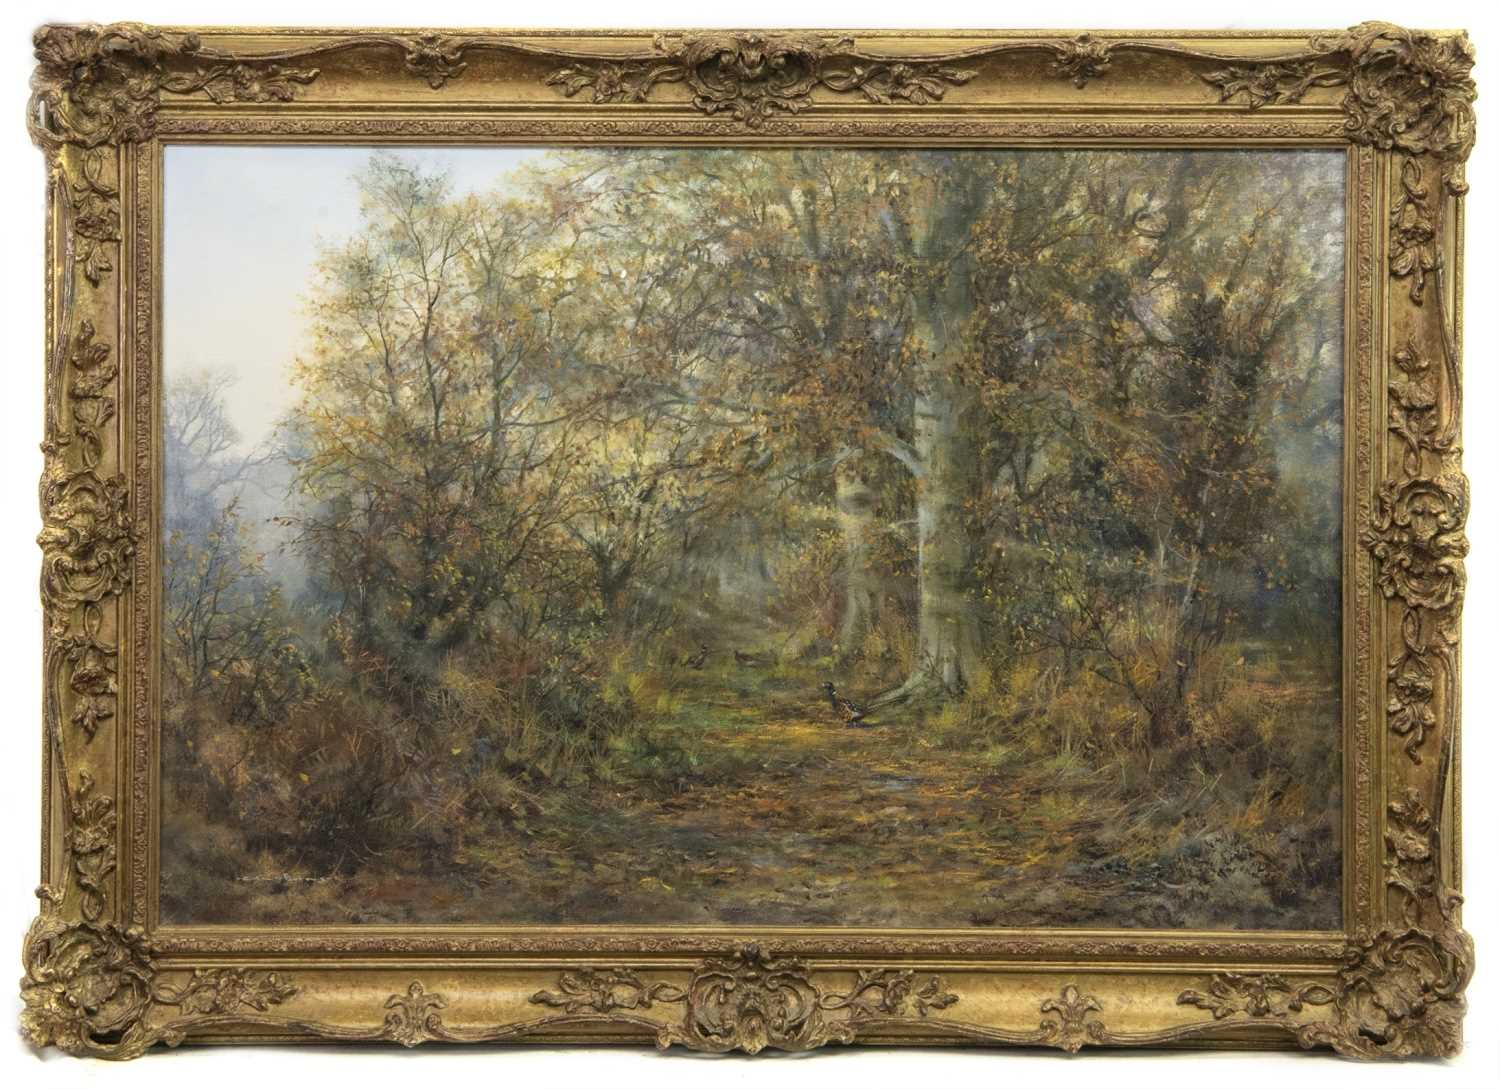 Lot 102 - PHEASANTS ON A WOODLAND PATH, AN OIL BY COLIN W BURNS